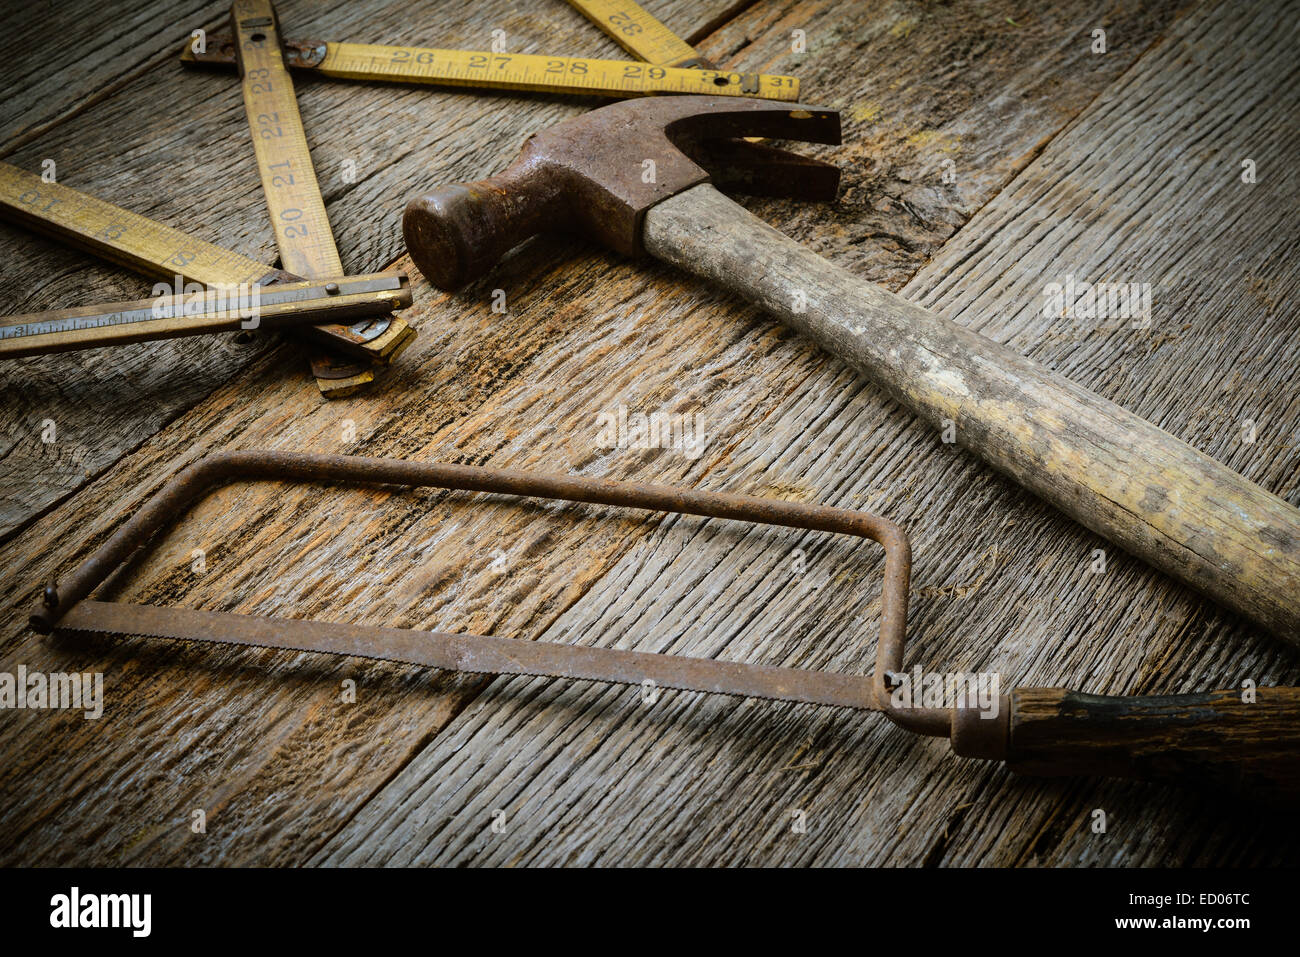 Hammer, Saw and Measuring Tape on Rustic Wood Background Stock Photo